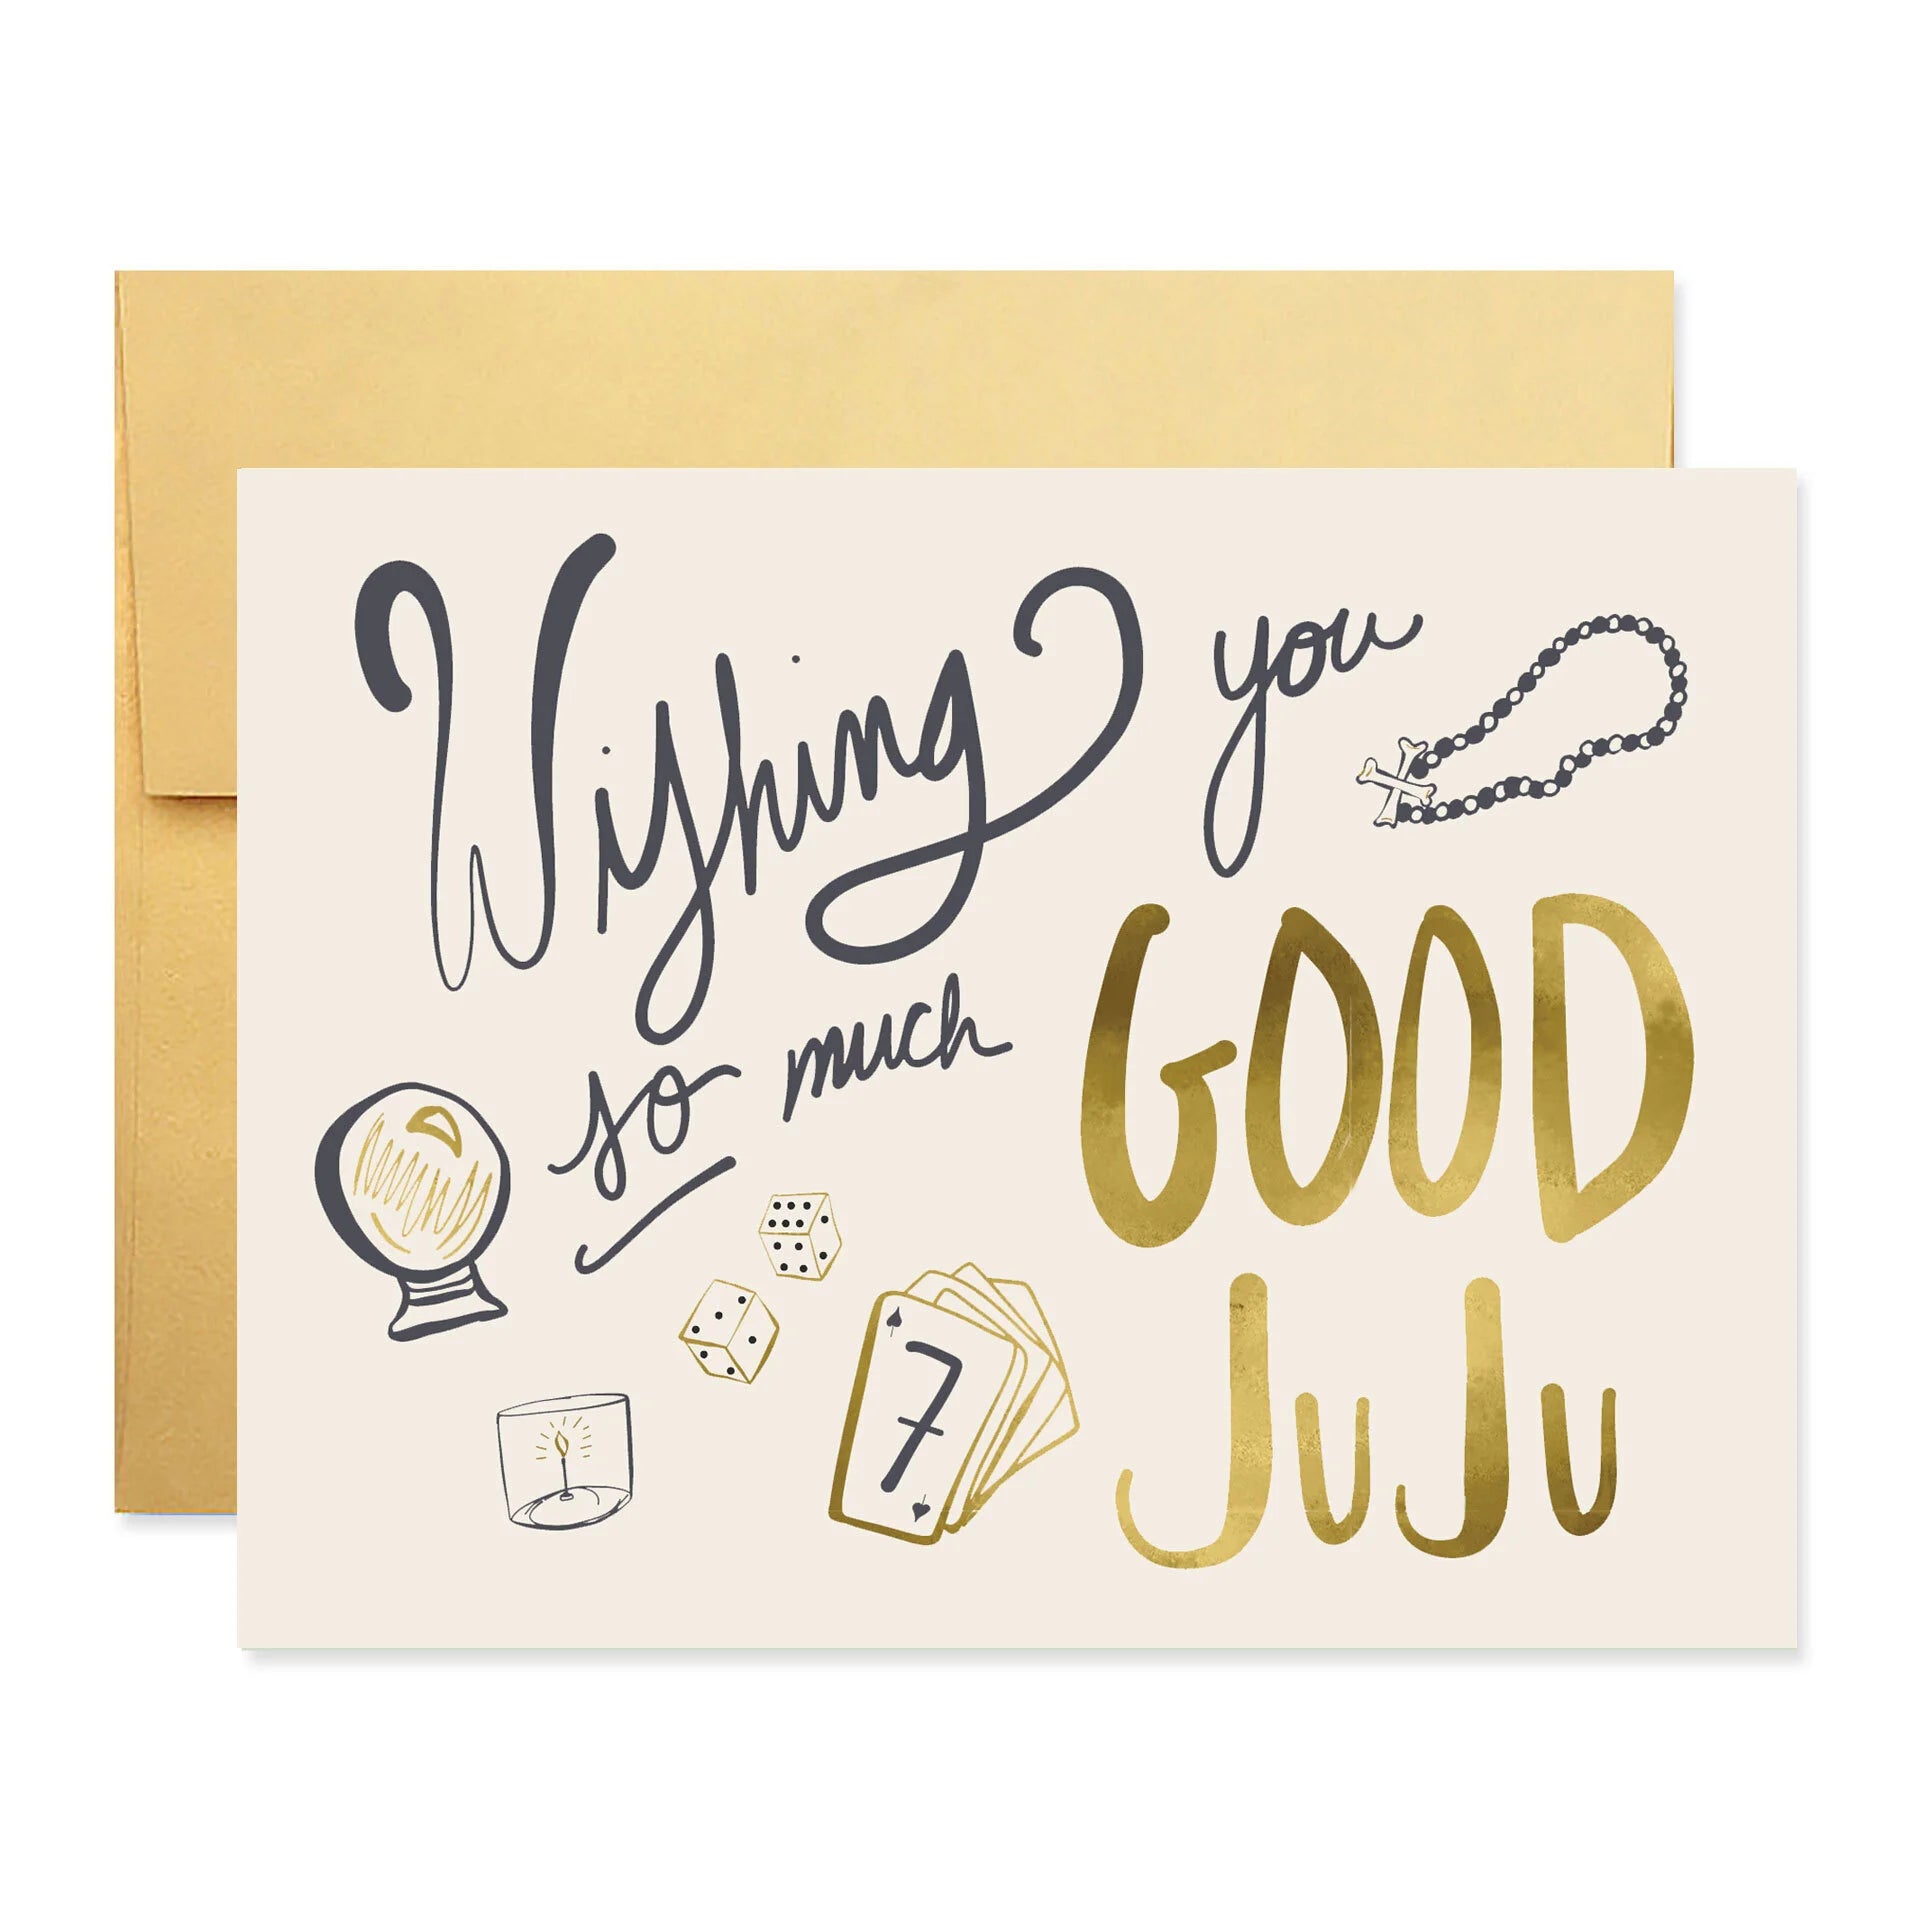 illustrated greeting card featuring gold foil accents